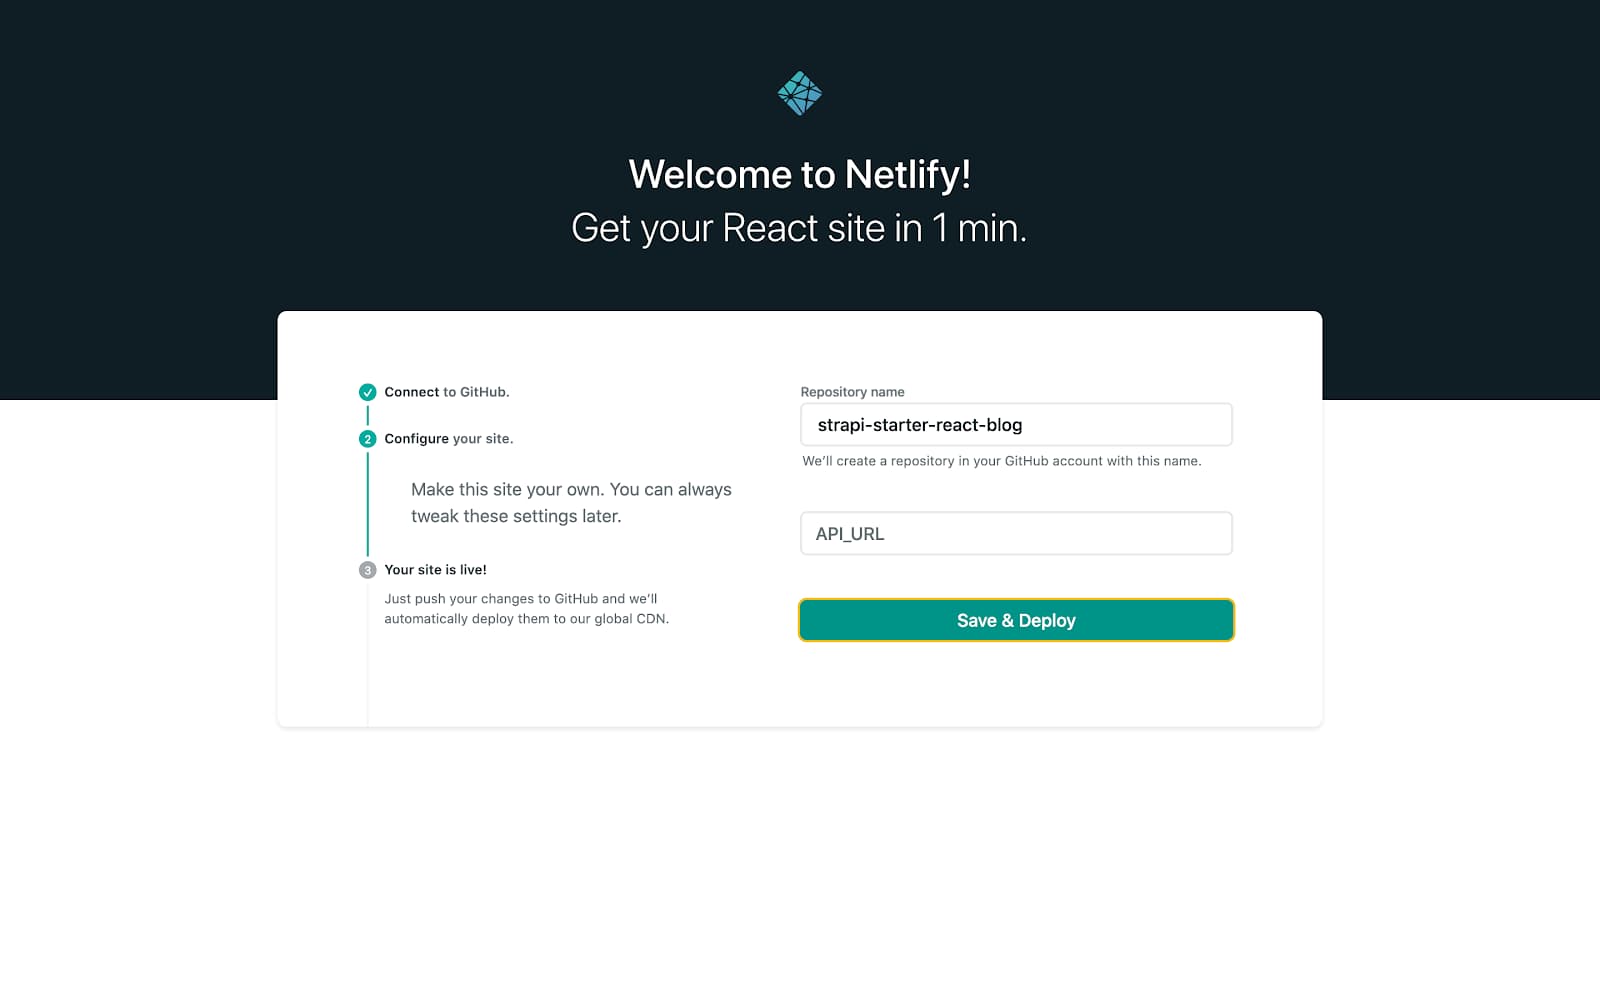 Deploy to Netlify workflow configuration page.